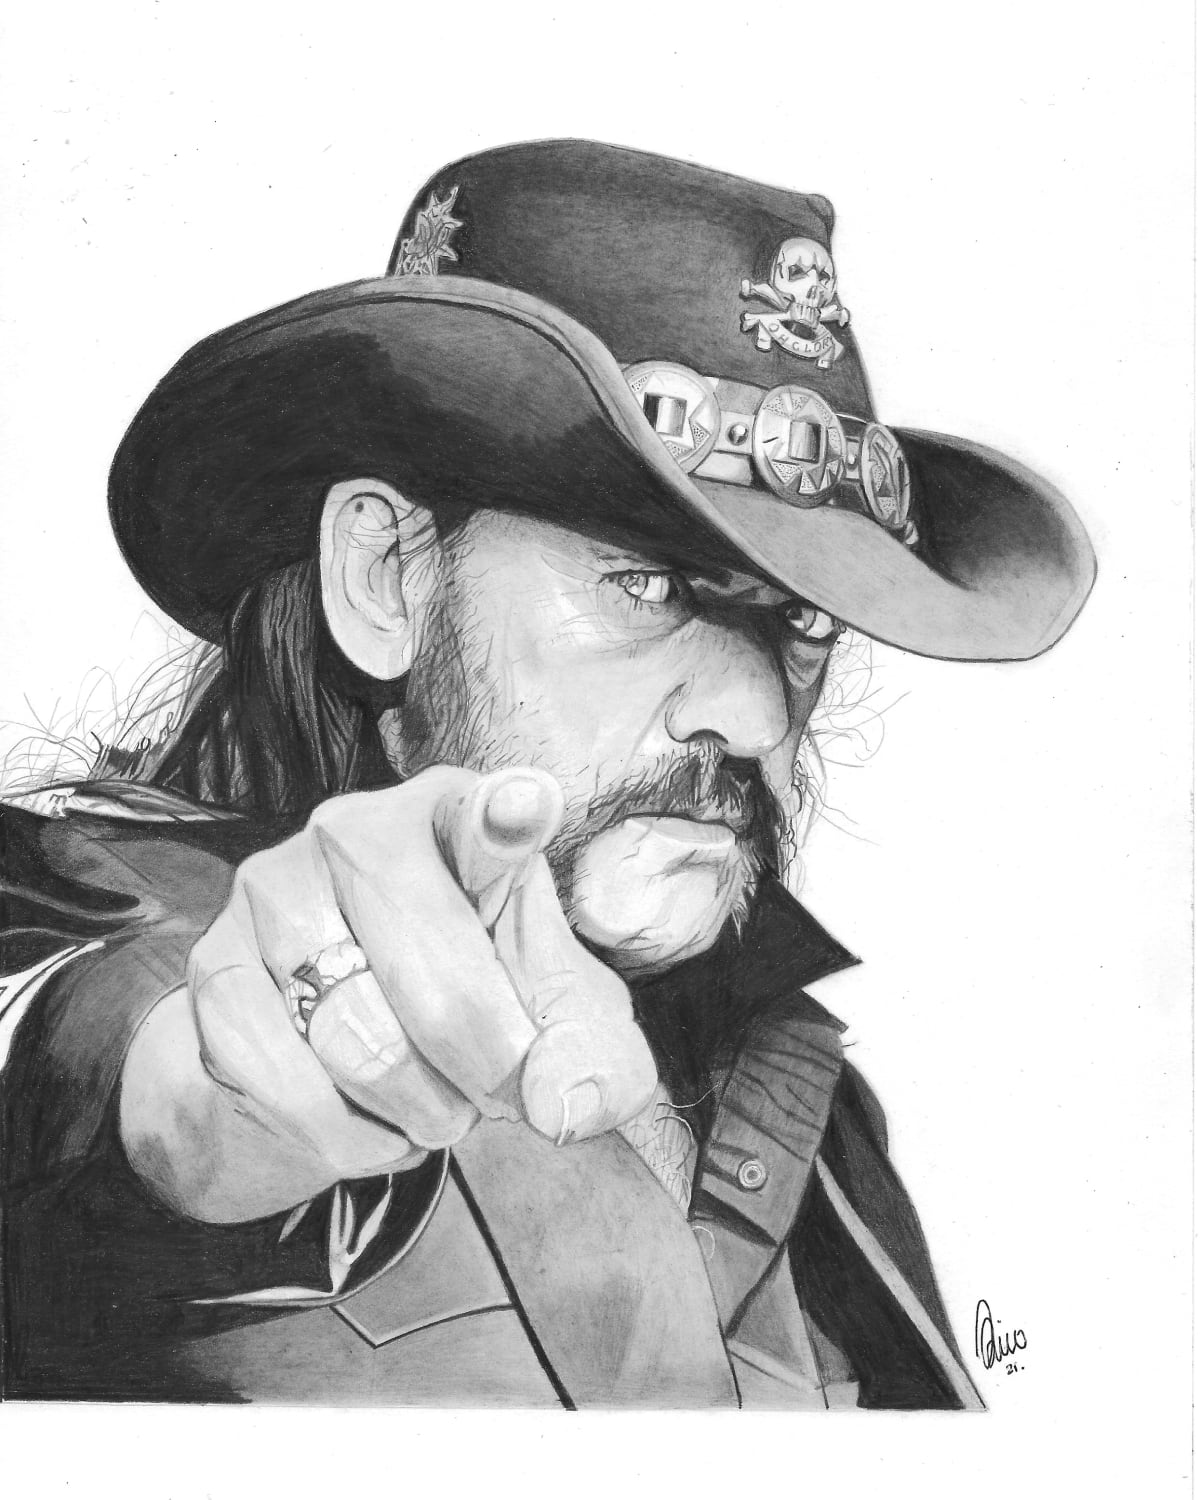 Lemmy, by me, graphite on paper, 2021